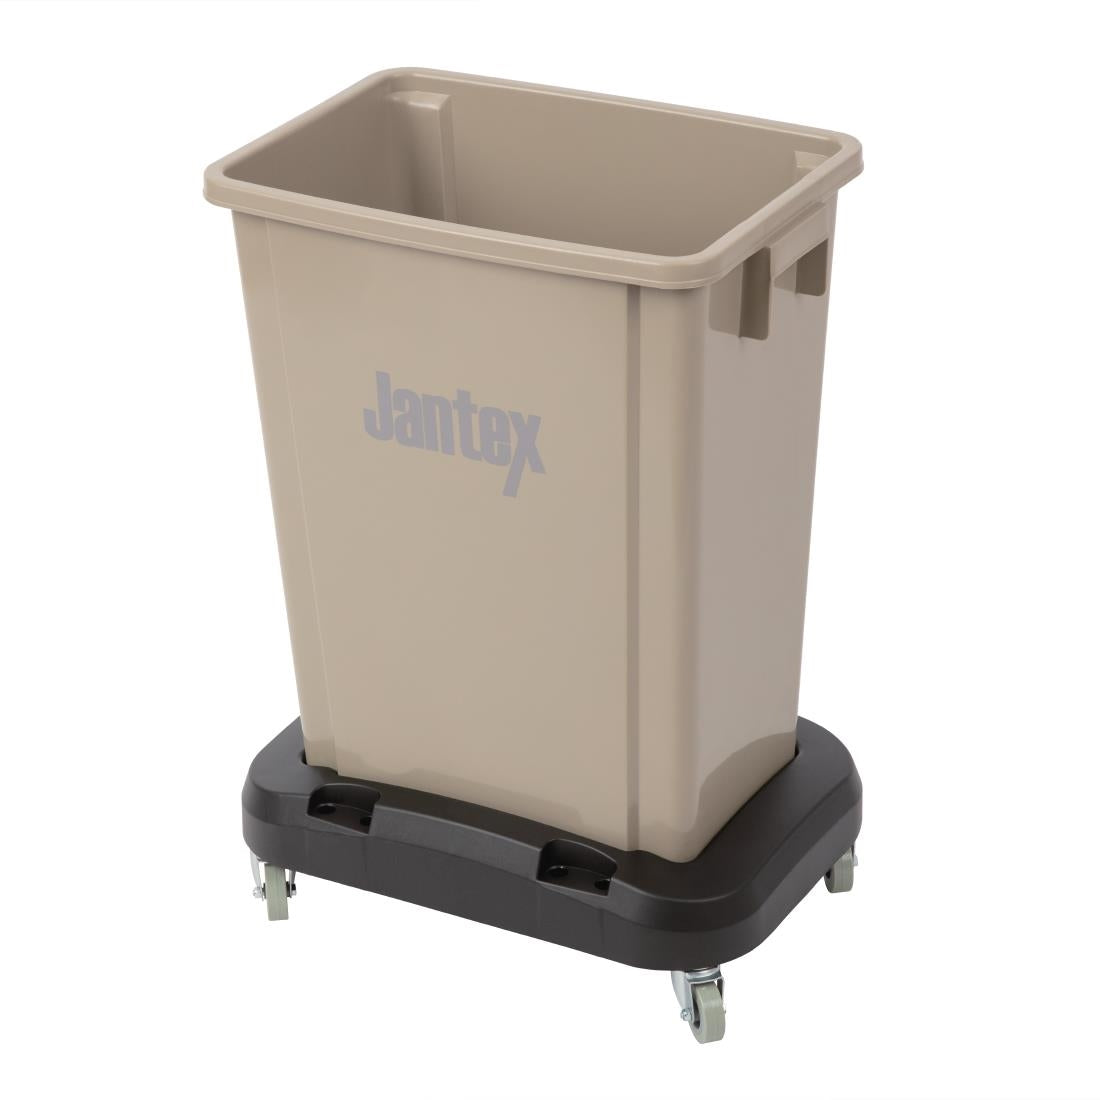 Jantex Dolly for CK960 JD Catering Equipment Solutions Ltd